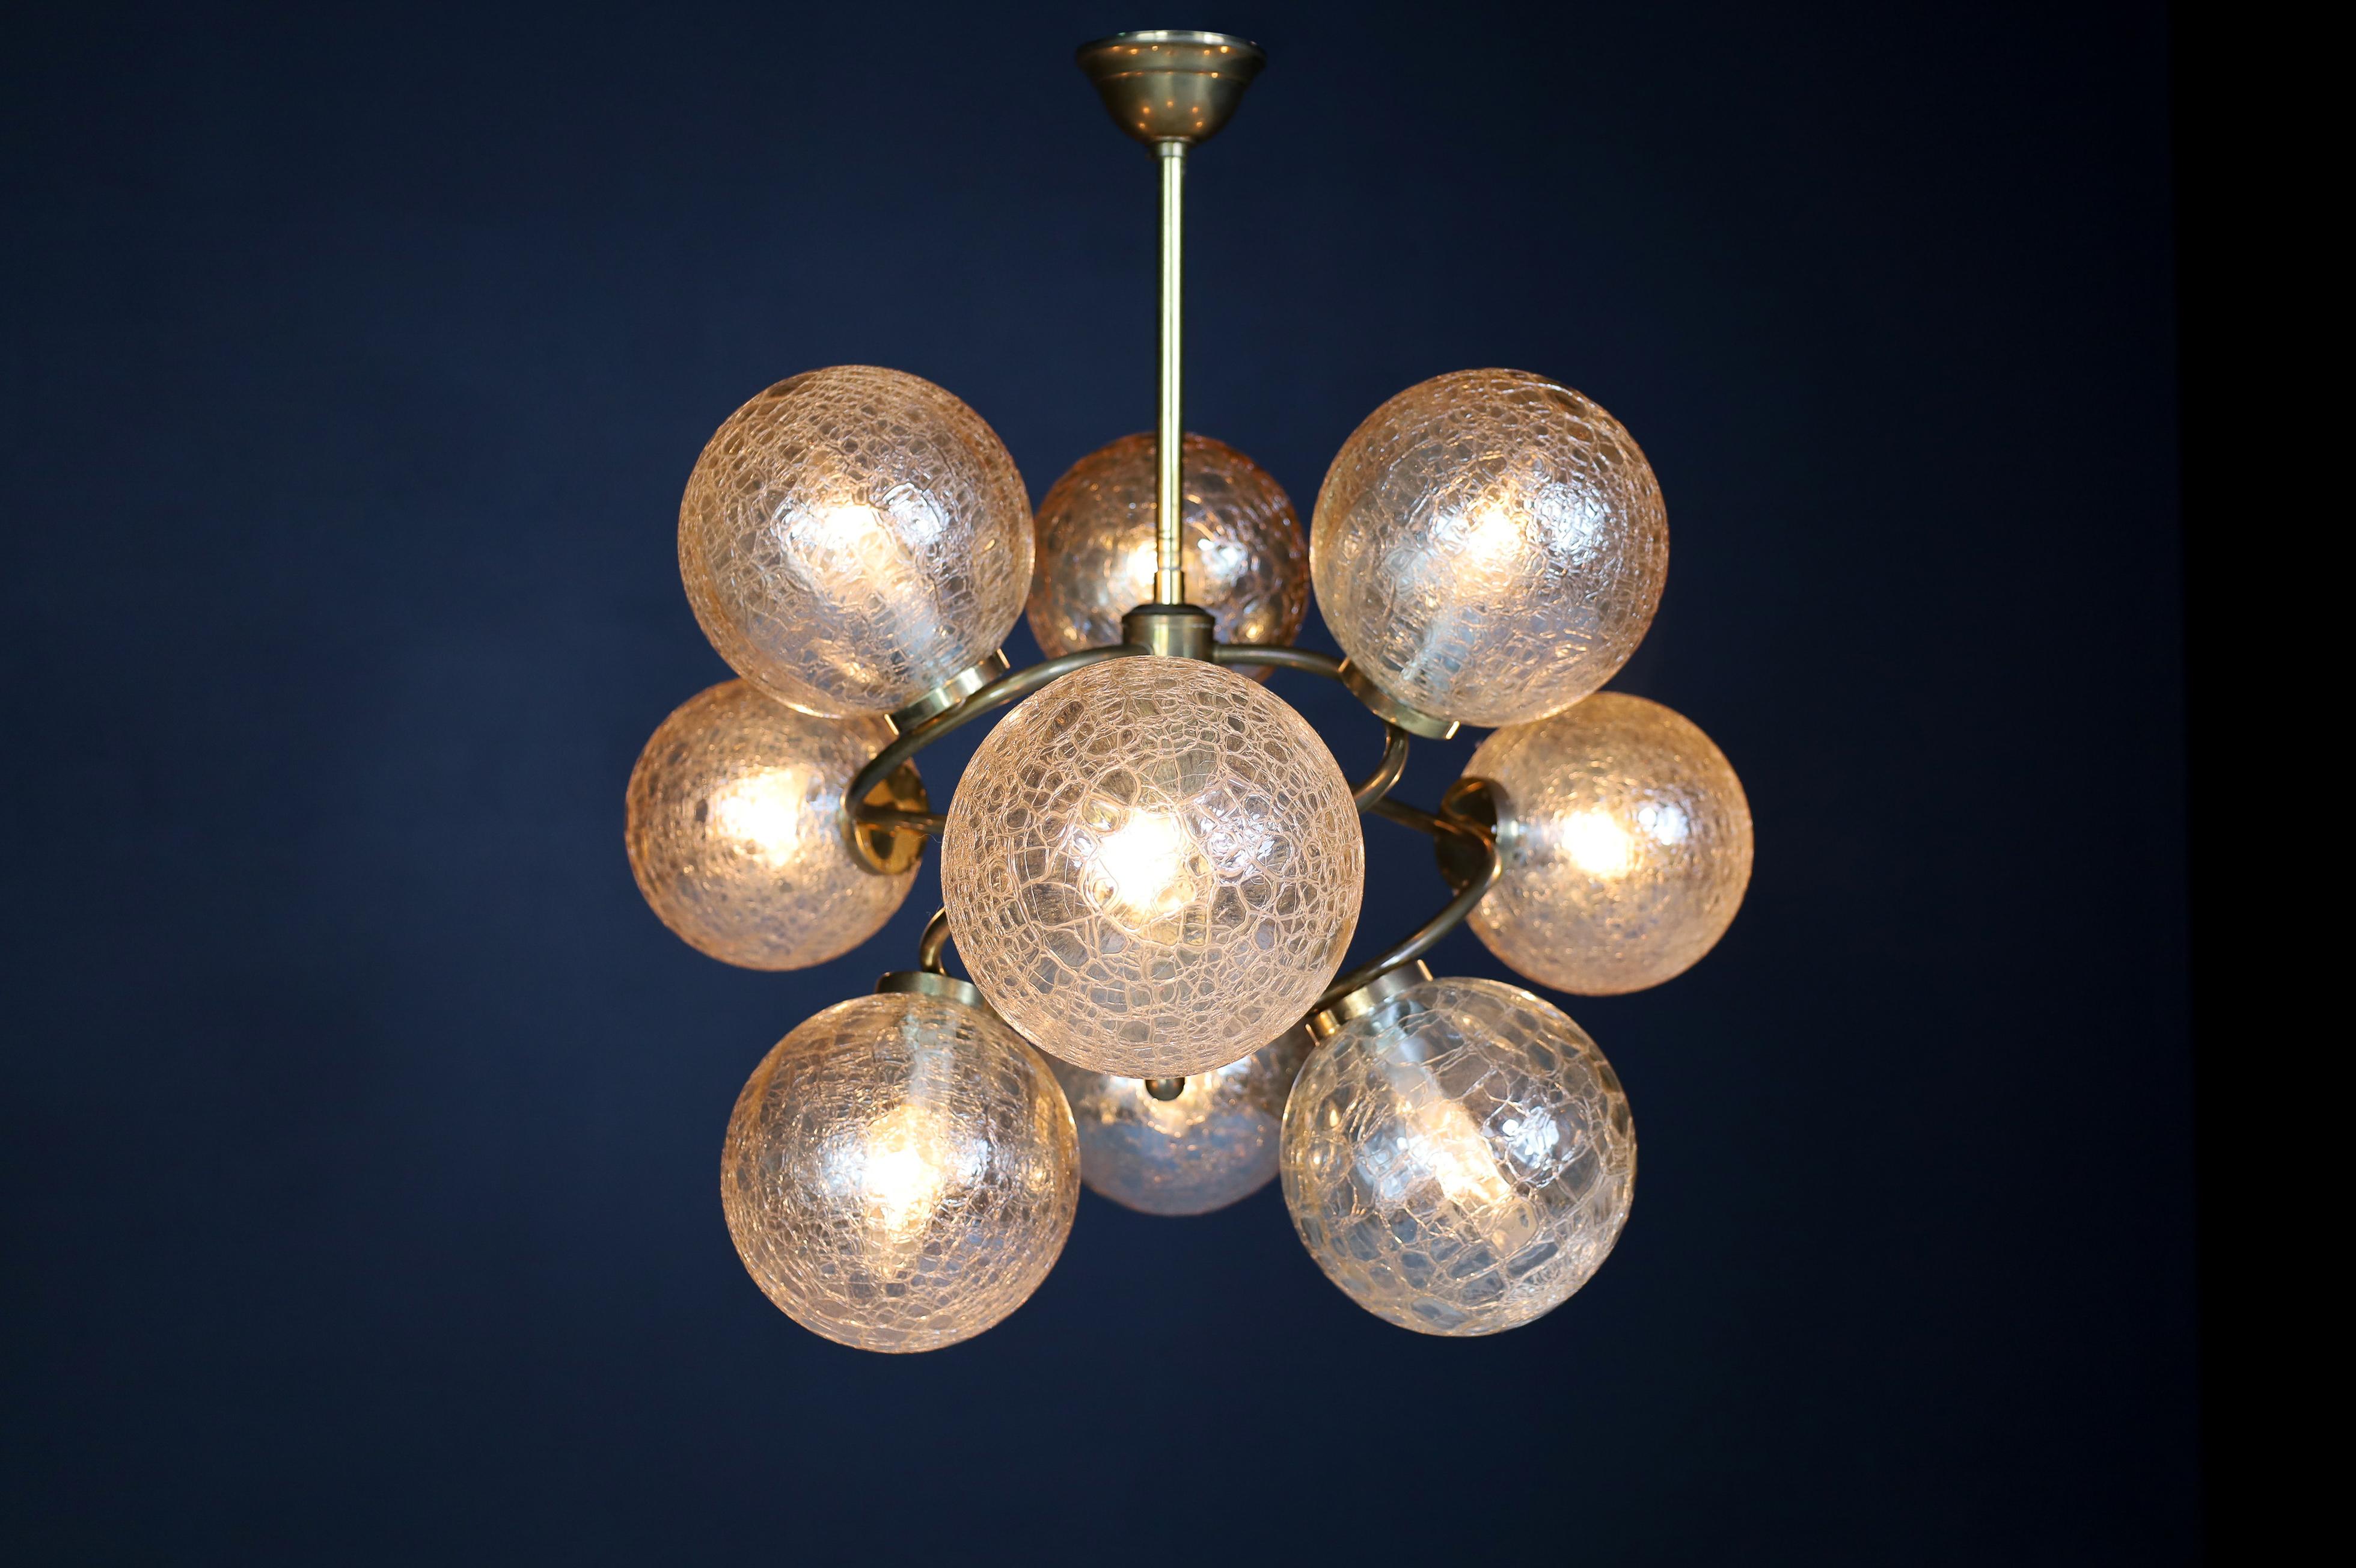 Patinated Brass Chandelier Wit Nine Amber-Colored Globes, Germany 1960s For Sale 11